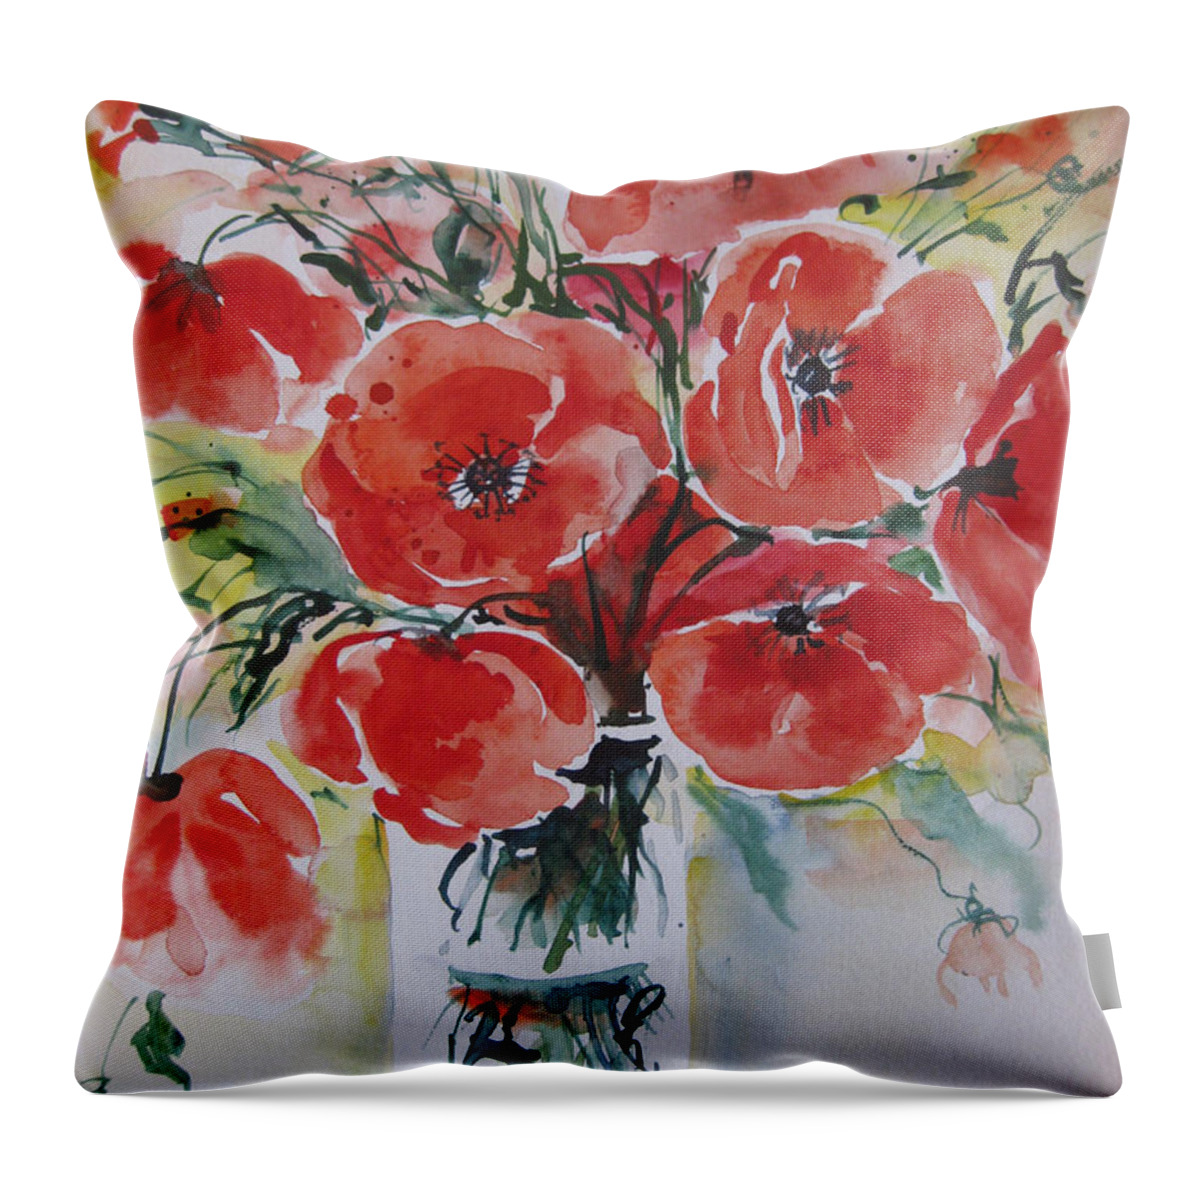 Watercolor Throw Pillow featuring the painting Poppies IV by Ingrid Dohm